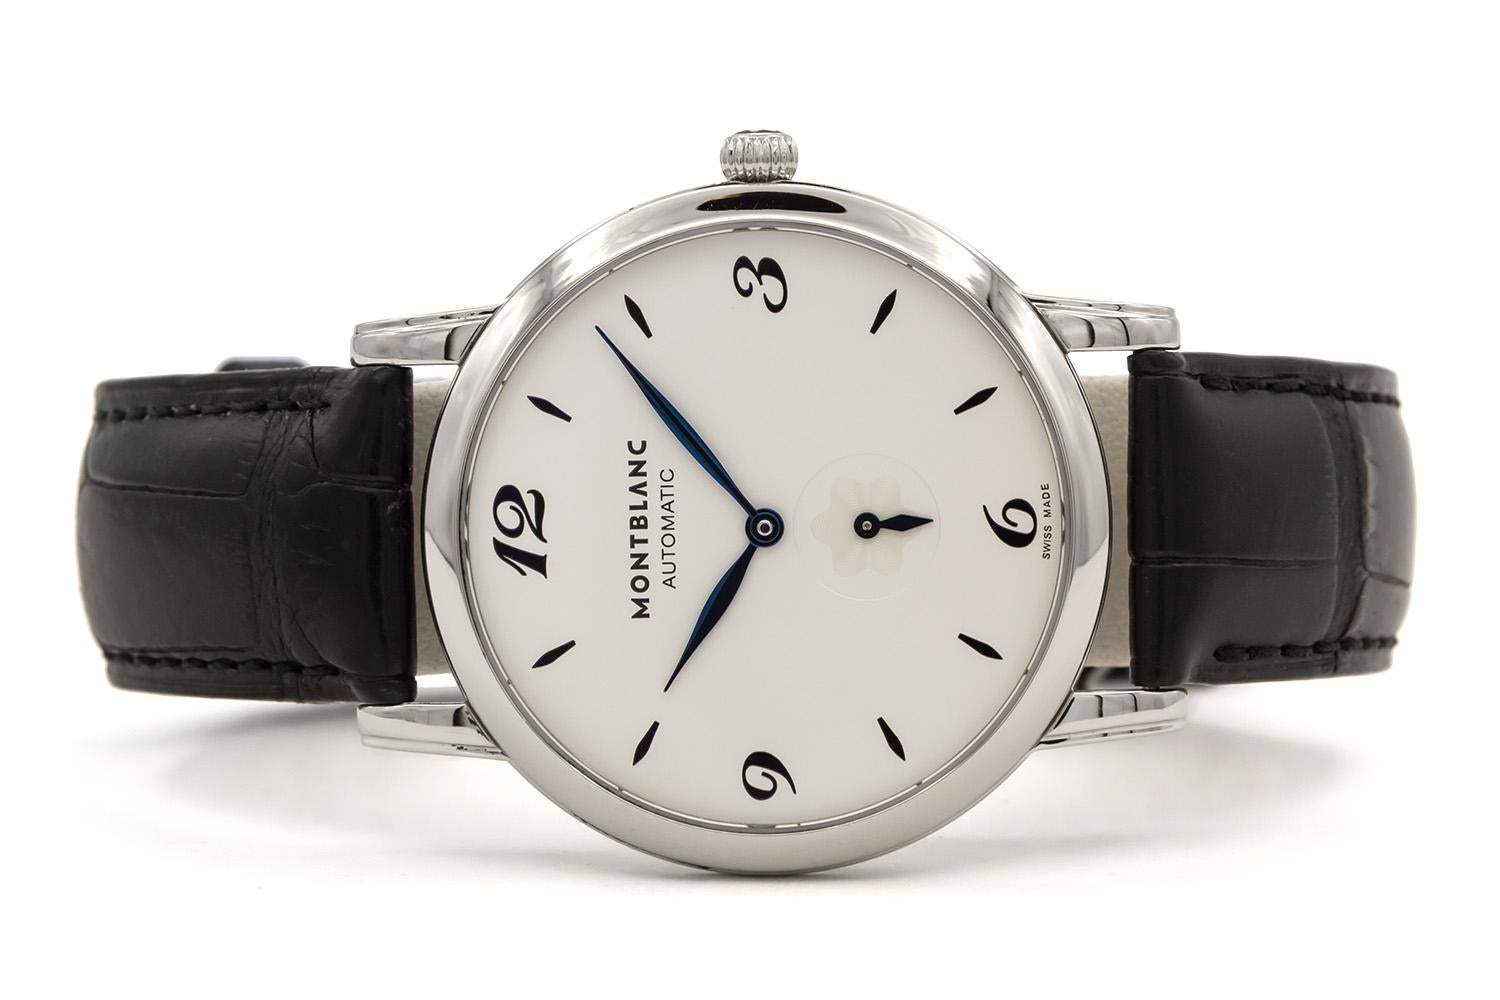 We are pleased to offer this excellent condition Montblanc Star Classique White Dial Men's Watch 107073 . This watch features a 39mm stainless steel case with skeleton case back, black alligator leather strap, fixed stainless steel bezel, white dial